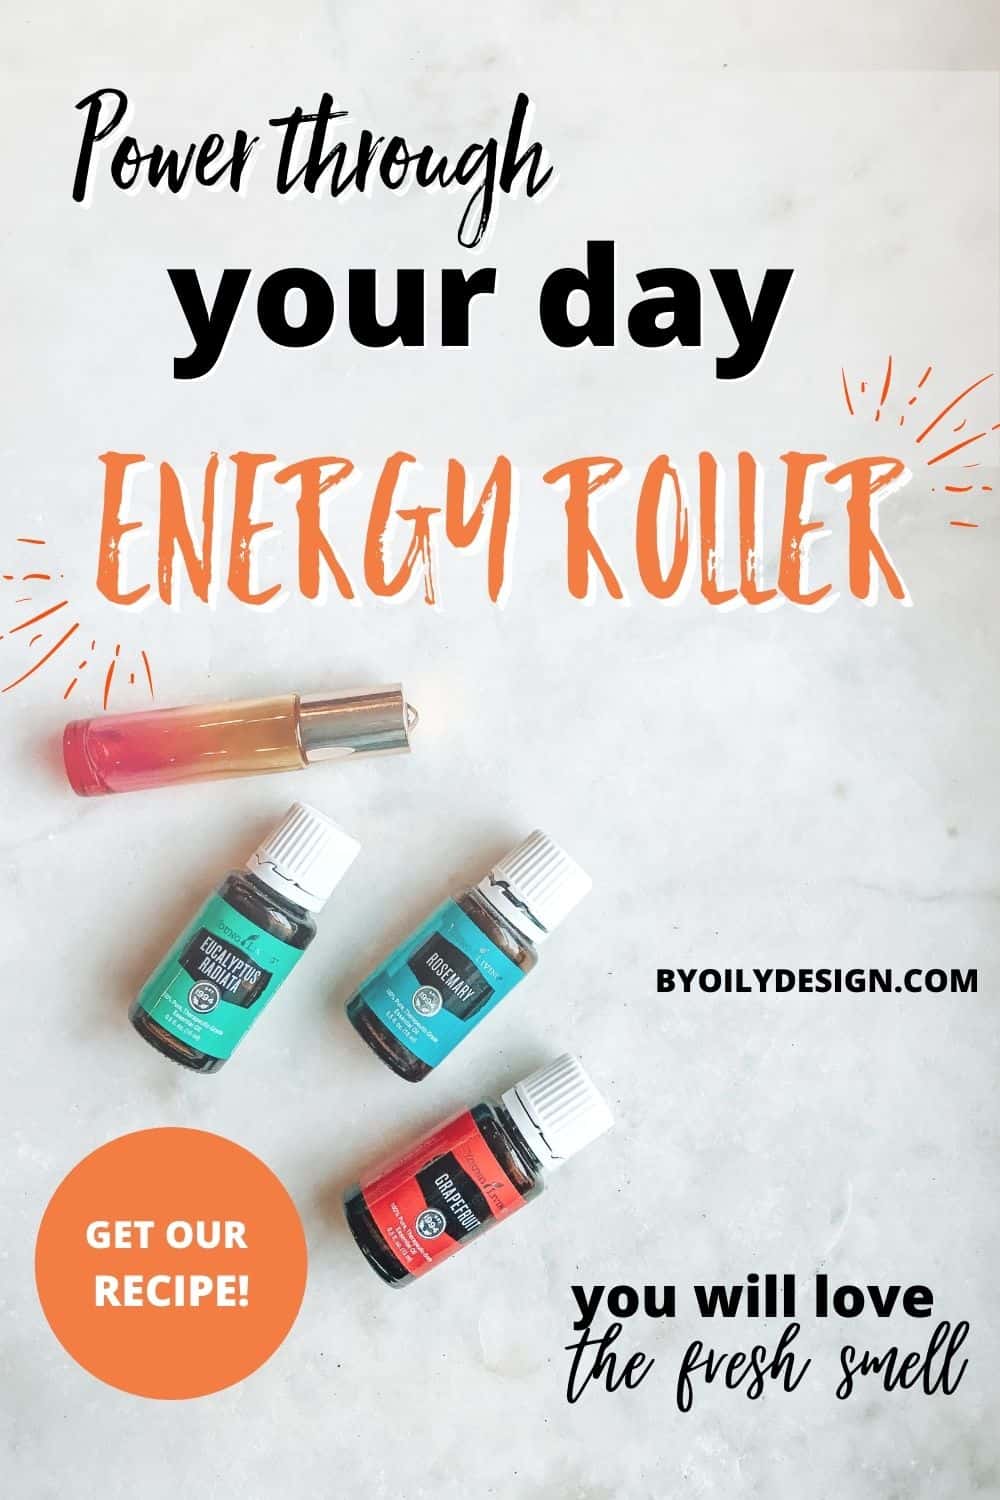 Essential Oils For Energy: DIY Pre-Workout Energy Boost